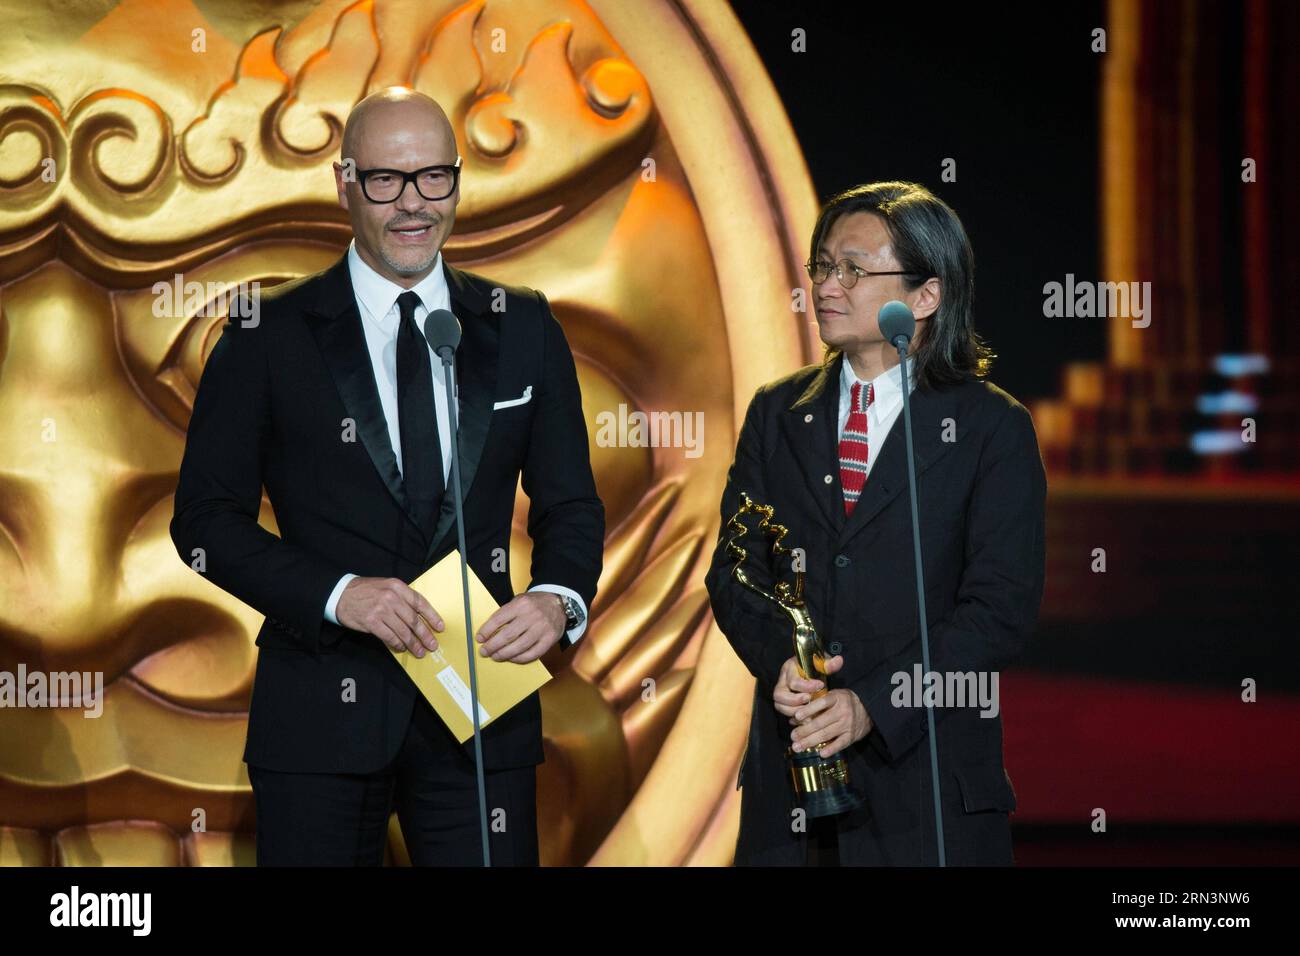 (150423) -- BEIJING, April 23, 2015 -- Guests Peter Chan (R) and Fedor Bondarchuk attend the awarding ceremony of the Tiantan Award of the fifth Beijing International Film Festival (BJIFF) in Beijing, capital of China, April 23, 2015. ) (mp) CHINA-BEIJING-FILM FESTIVAL-TIANTAN AWARD (CN) ChenxJianli PUBLICATIONxNOTxINxCHN   Beijing April 23 2015 Guests Peter Chan r and Fedor Bondarchuk attend The awarding Ceremony of The Tiantan Award of The Fifth Beijing International Film Festival  in Beijing Capital of China April 23 2015 MP China Beijing Film Festival Tiantan Award CN ChenxJianli PUBLICATI Stock Photo